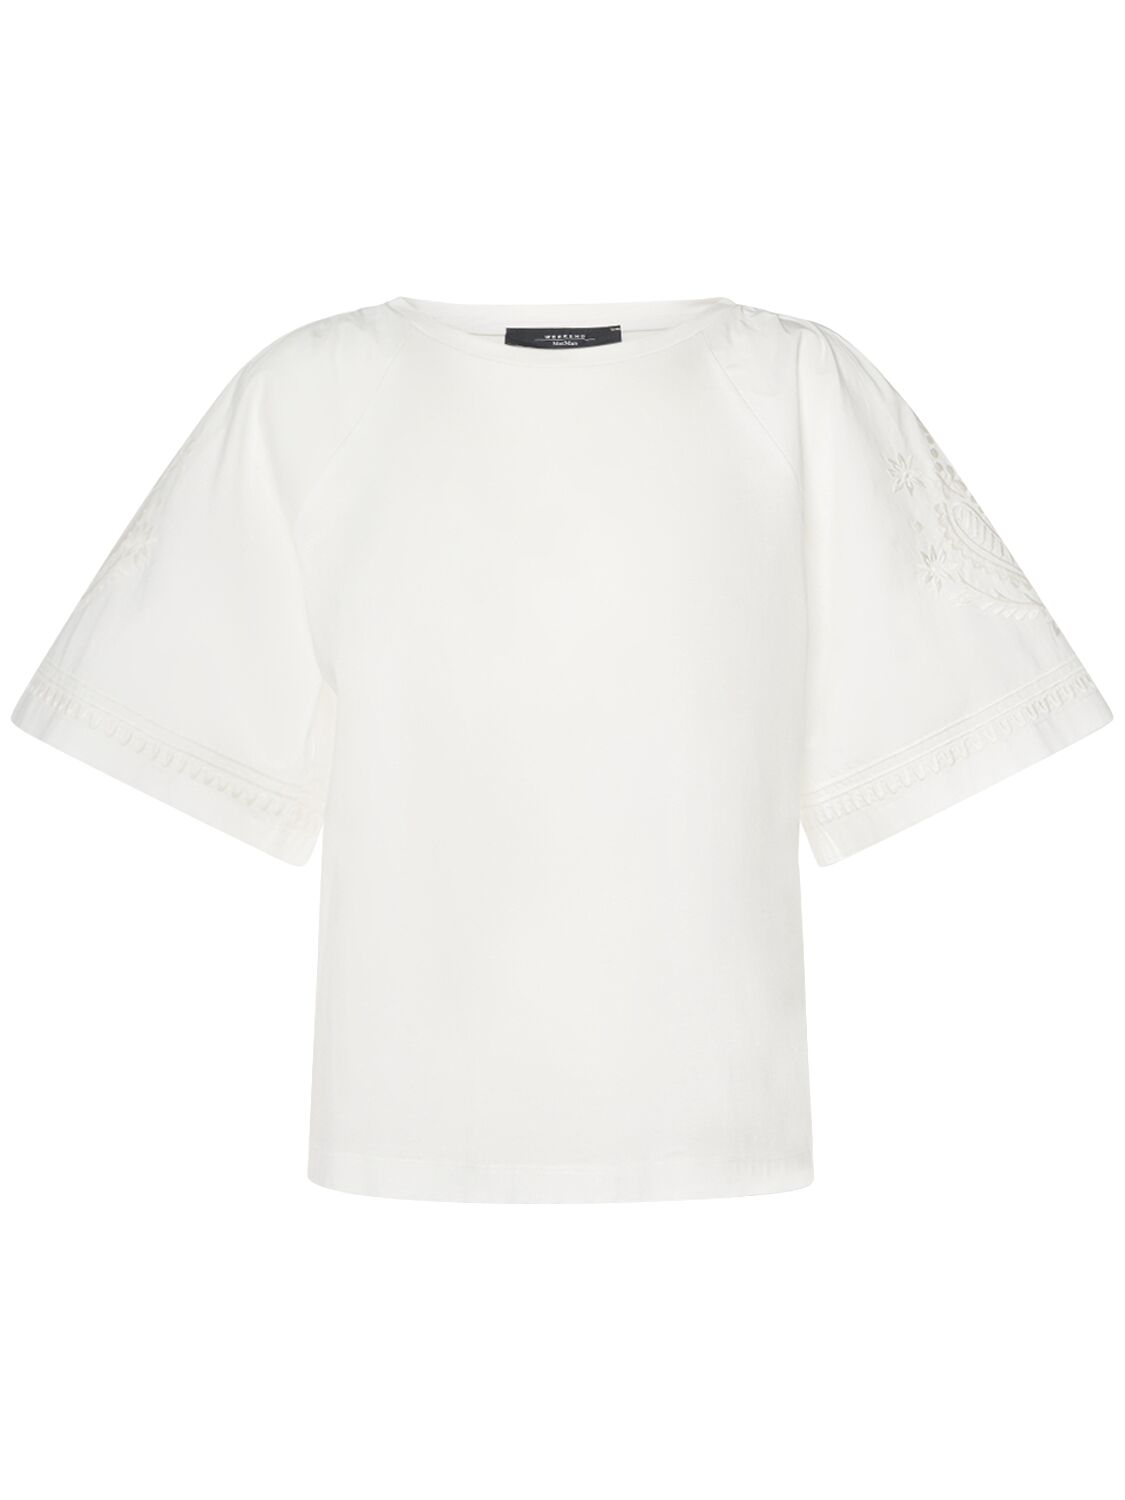 Weekend Max Mara Livorno Cotton Jersey Top W/embroidery In White